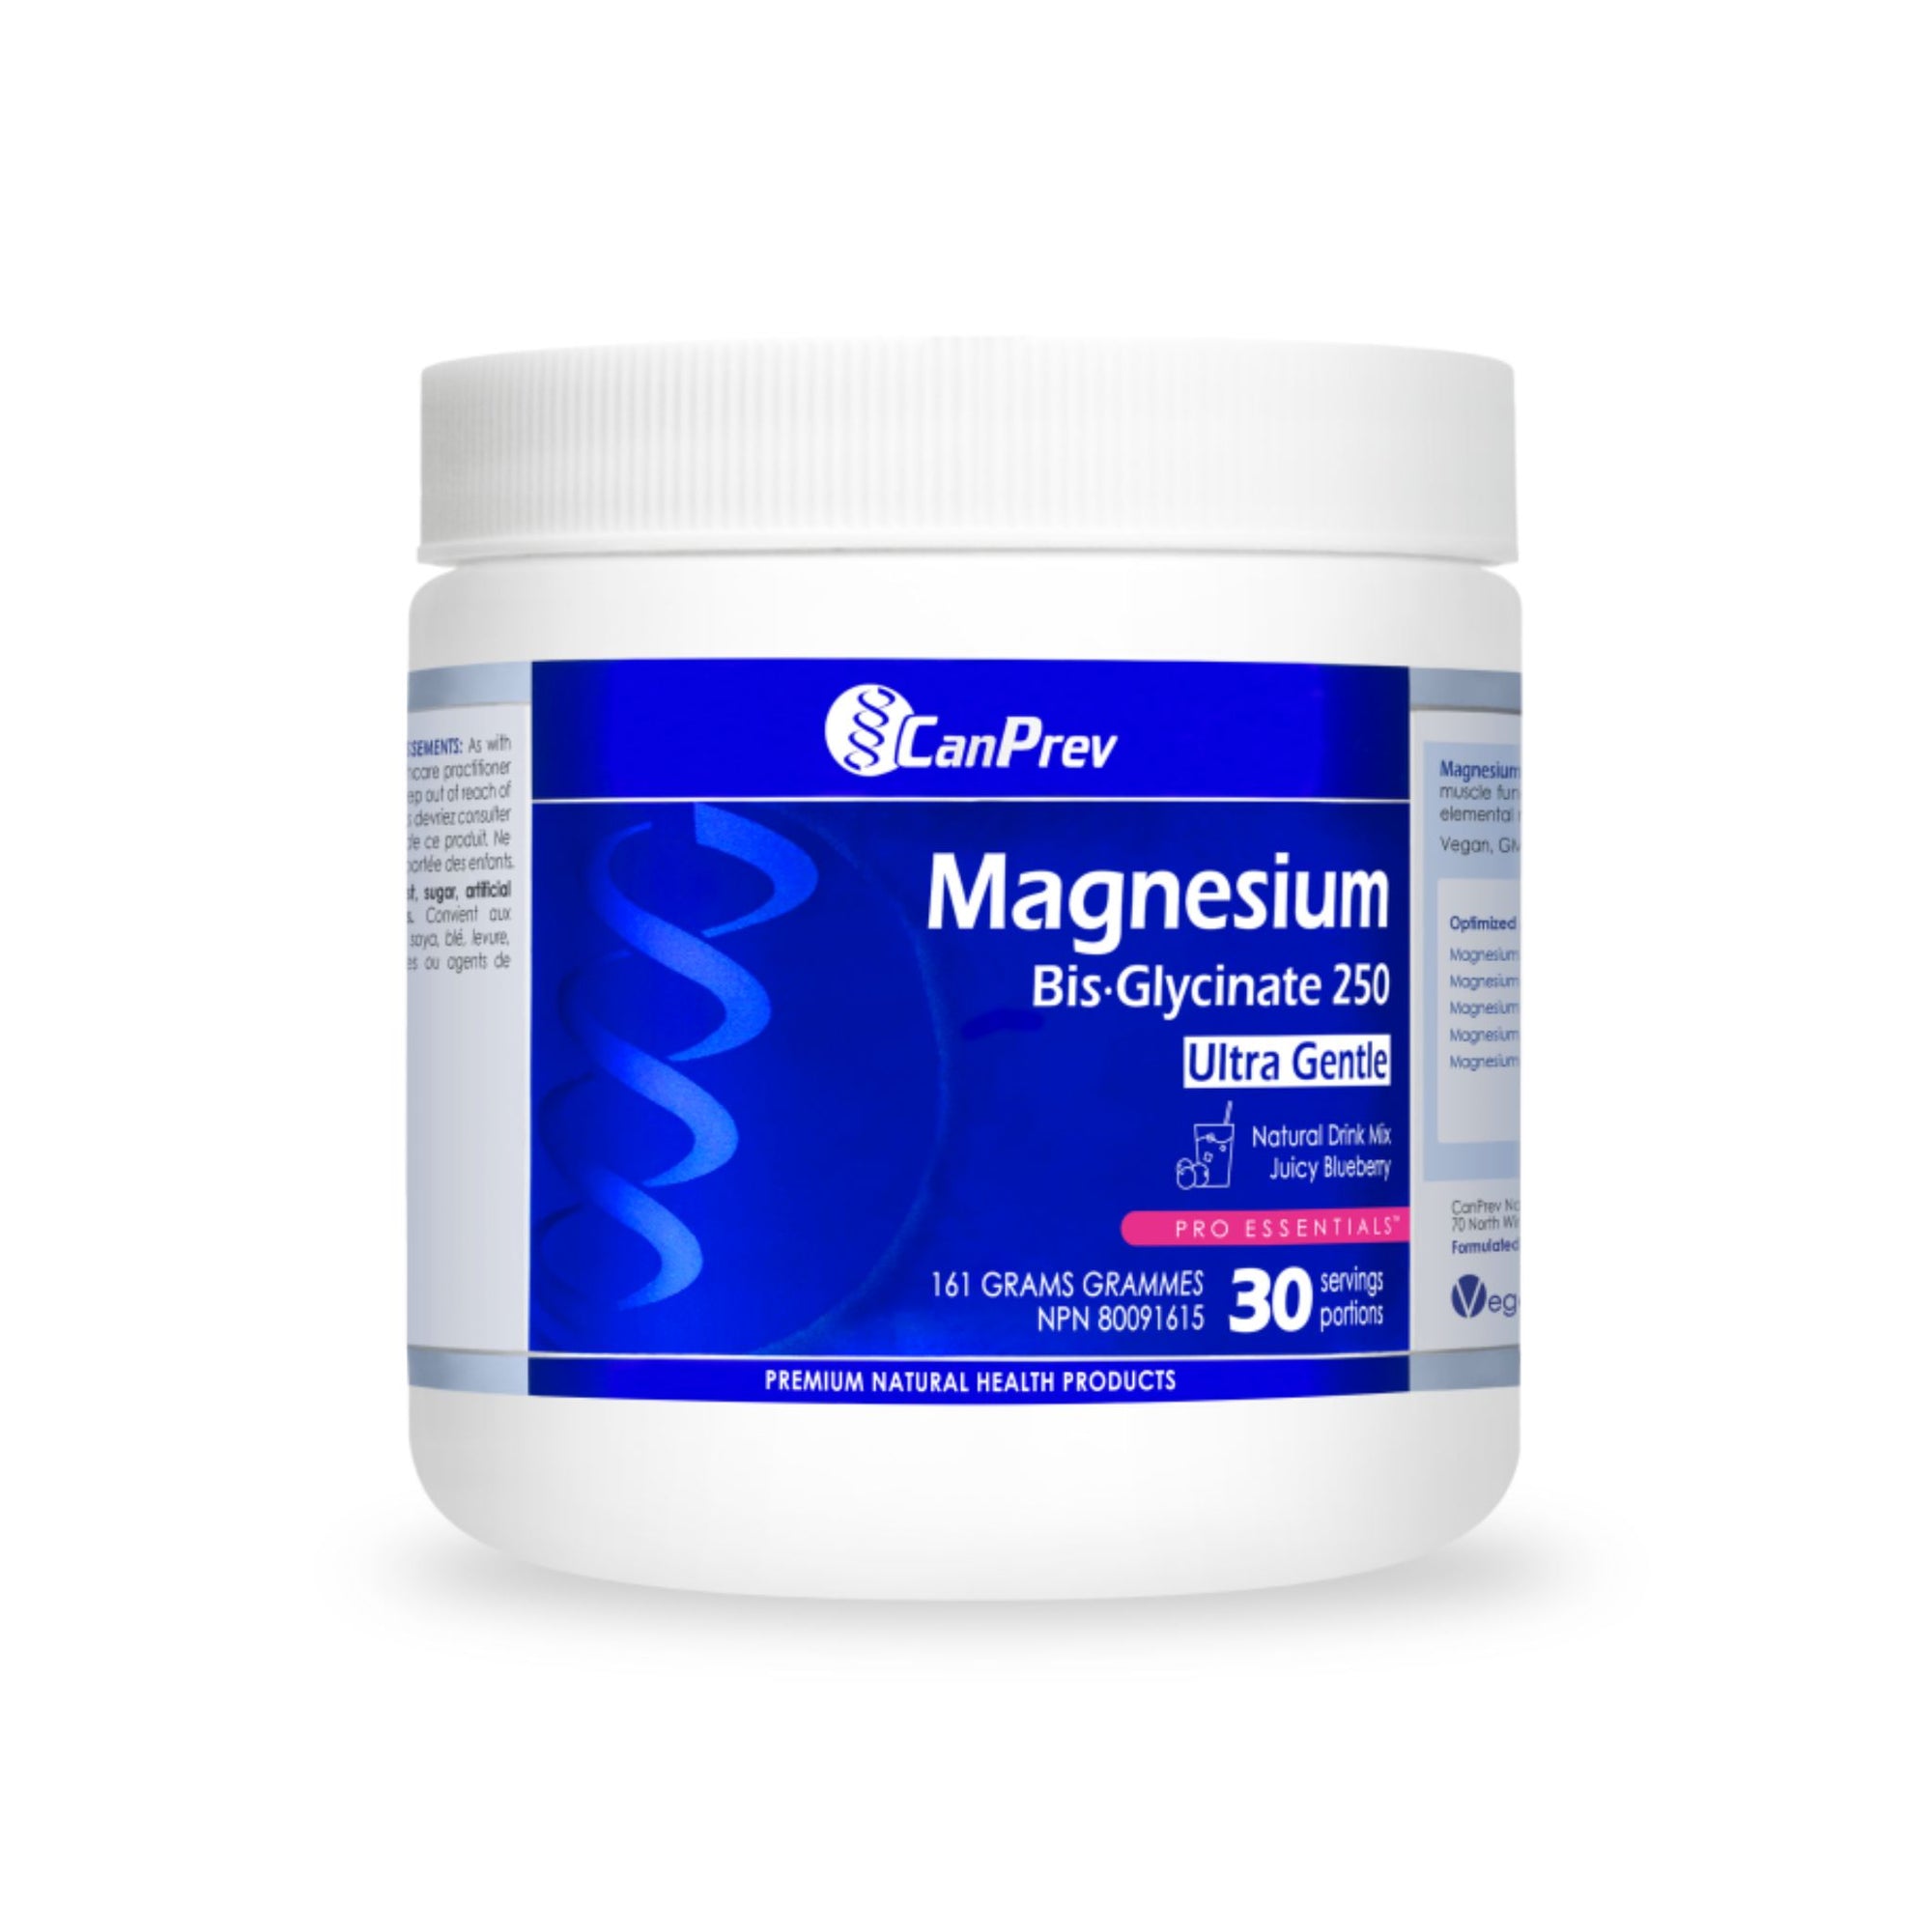 Bottle of CanPrev Magnesium Bisglycinate Juicy Blueberry Powder 161g/30 servings - Ultra gentle formula with 250mg of magnesium per serving.